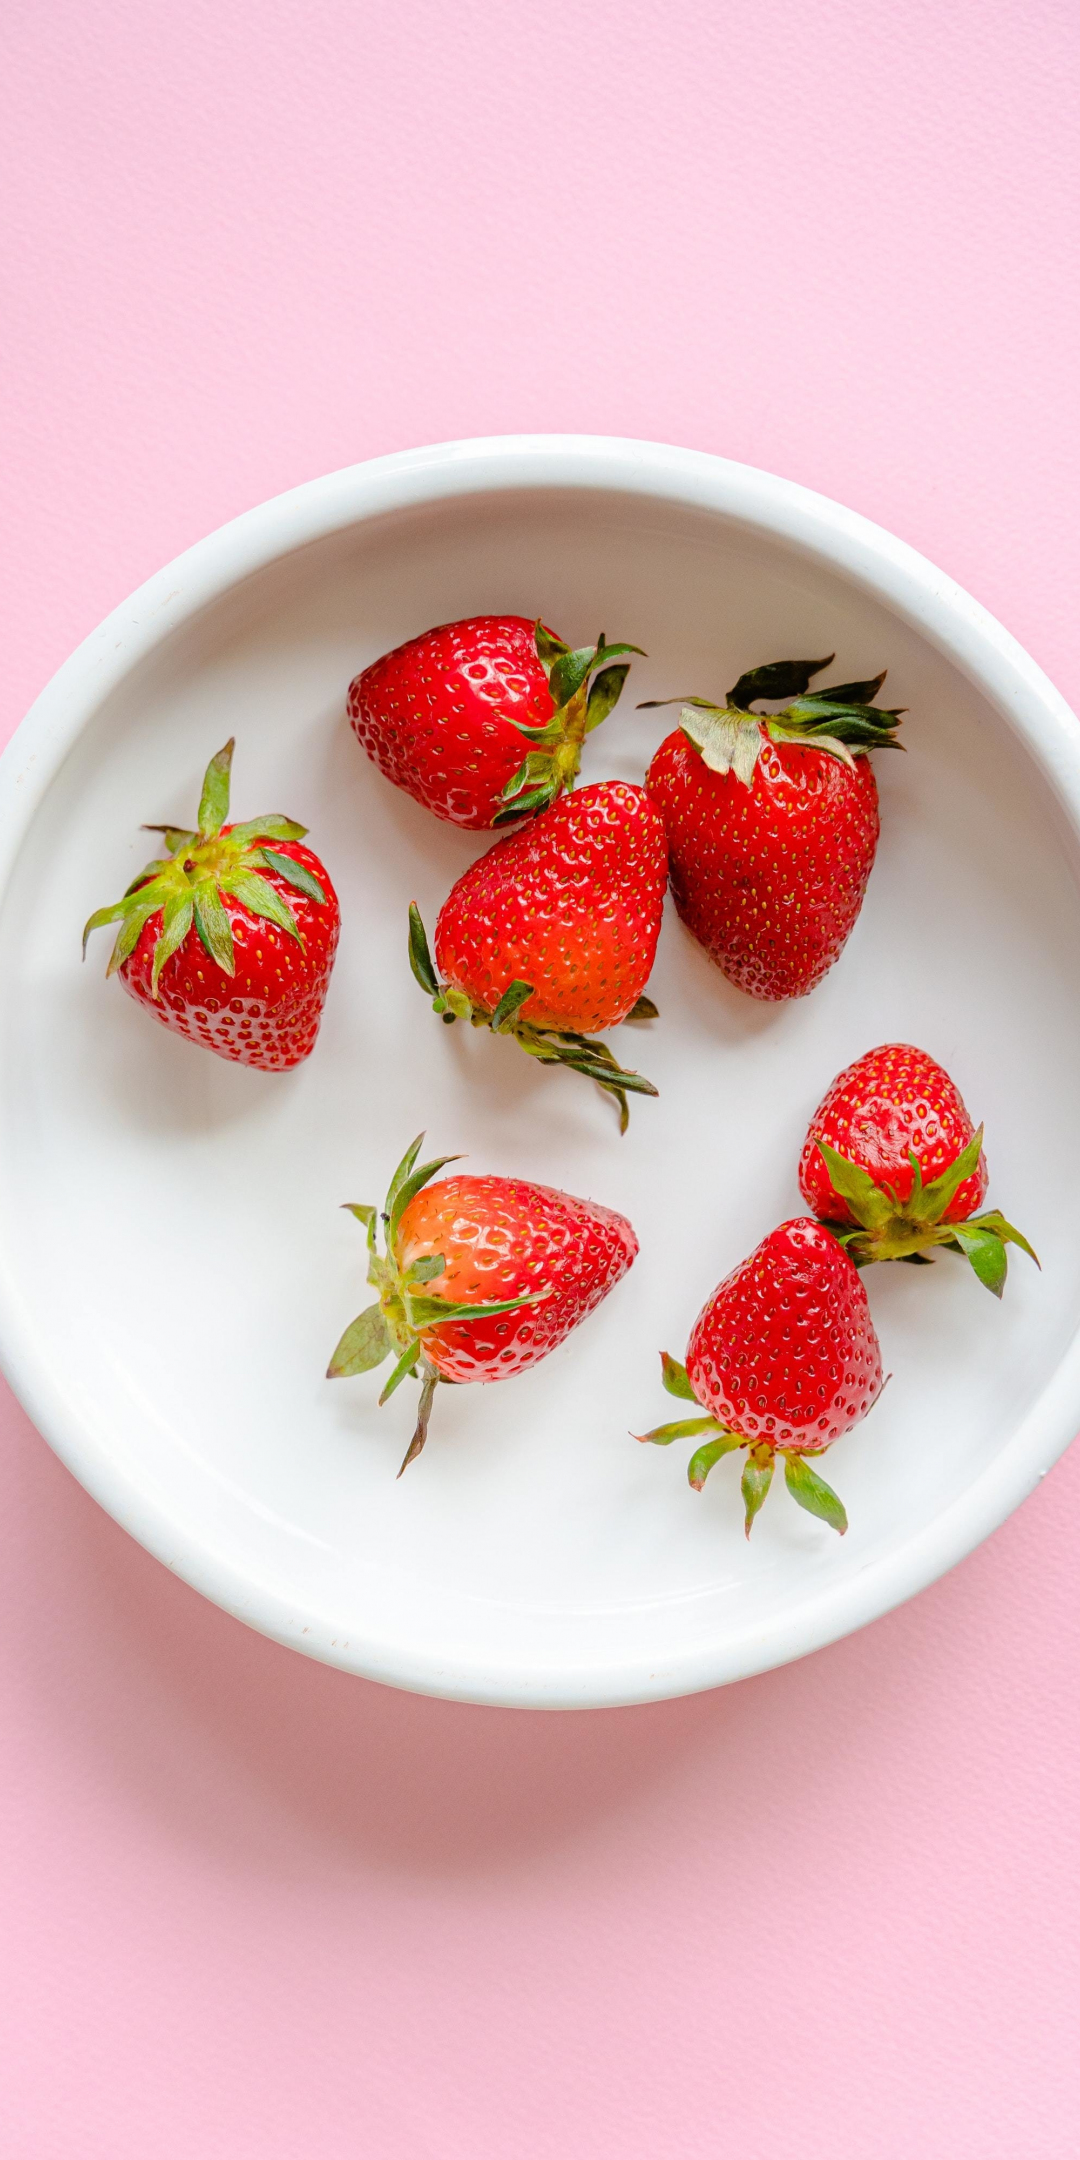 Red fruits, strawberries, 1080x2160 wallpaper